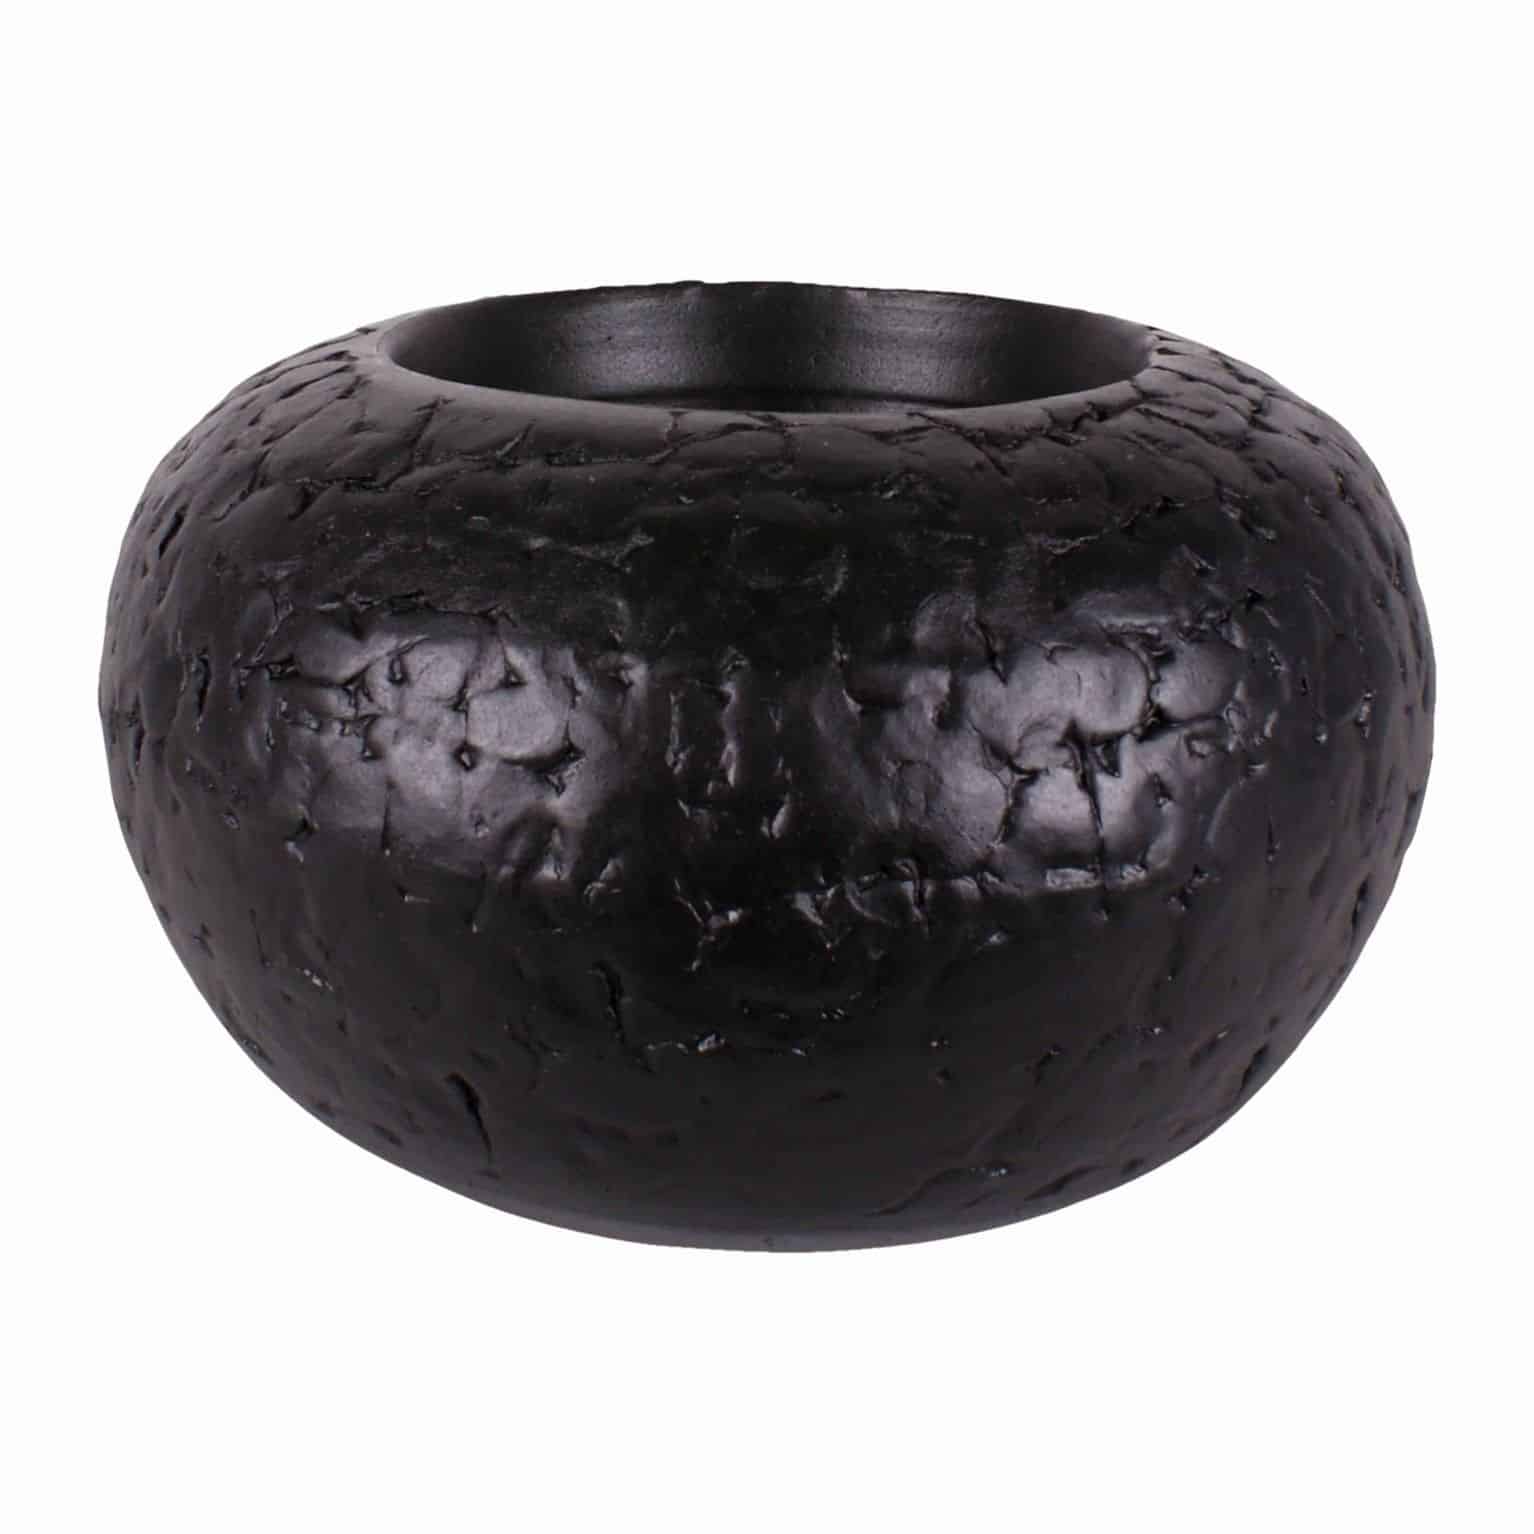 Buy our unique hand made black cranium planter pot. A modern design with interesting grooves to add a chic touch to your plants and flowers.